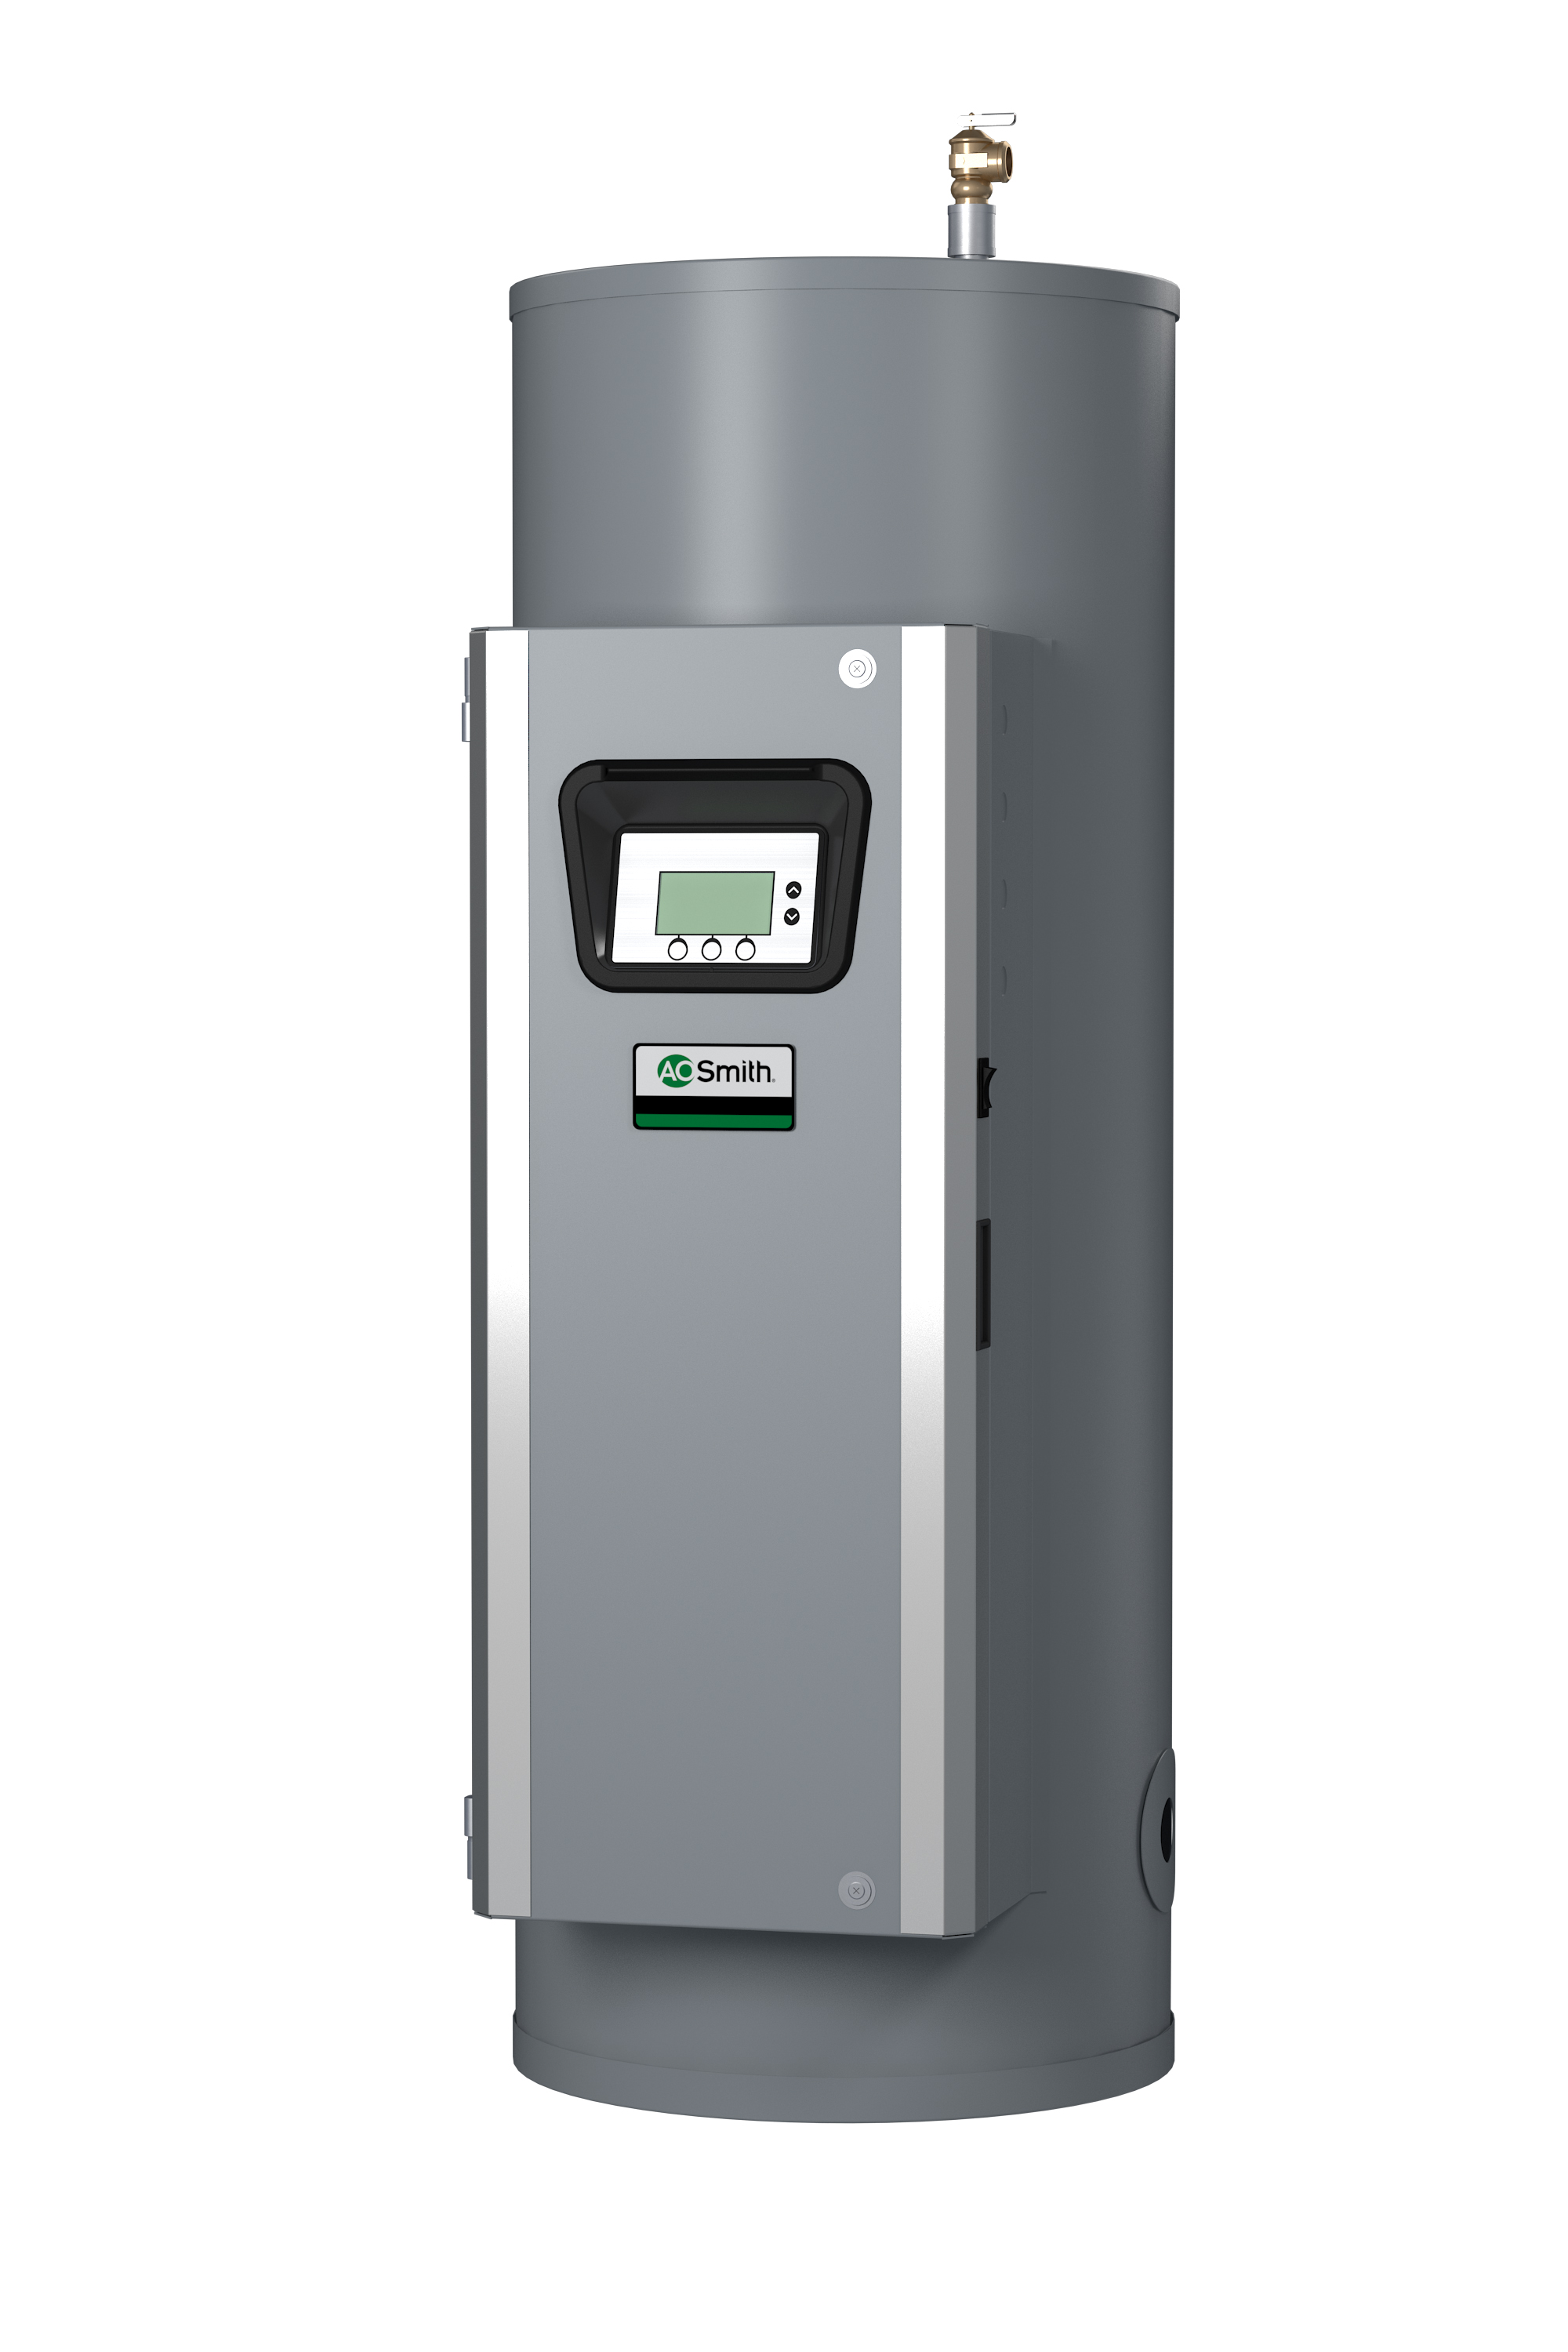 AO SMITH DSE-100A-15, 100 GALLONS, 15KW, 480 VOLT, 31.3 AMPS, 1 PHASE, 1 ELEMENT, ASME CUSTOM Xi SERIES HEAVY DUTY COMMERCIAL ELECTRIC WATER HEATER